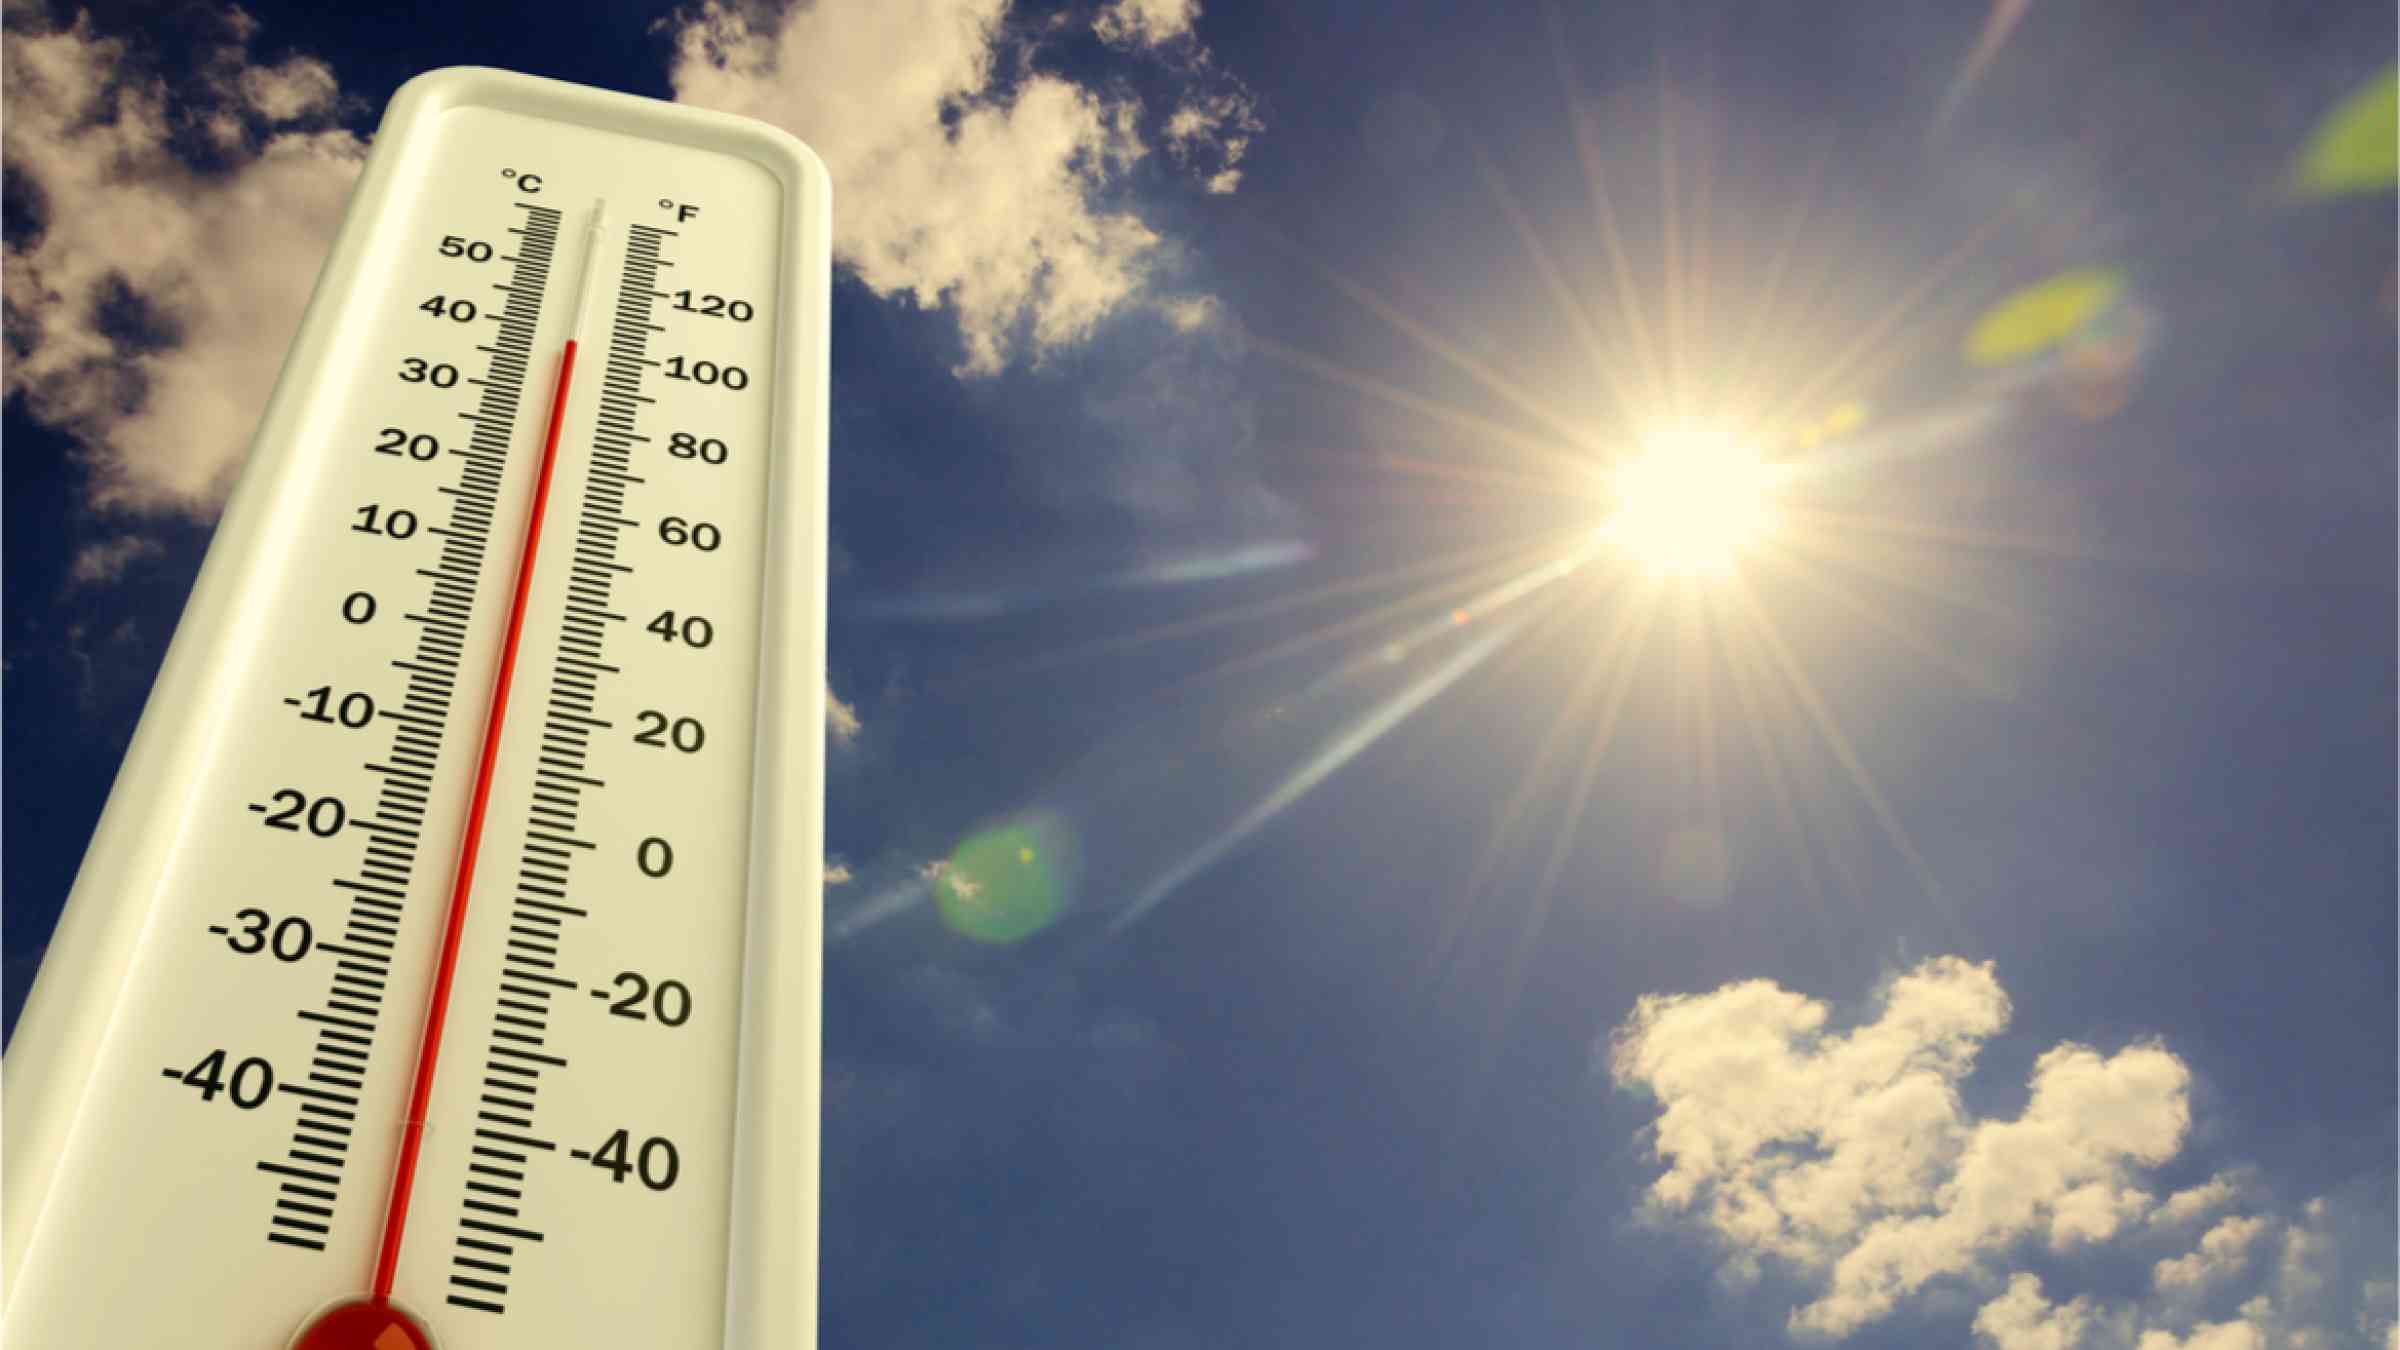 This image shows a thermometer indicating high temperatures. The sun is shining brightly in the sky.